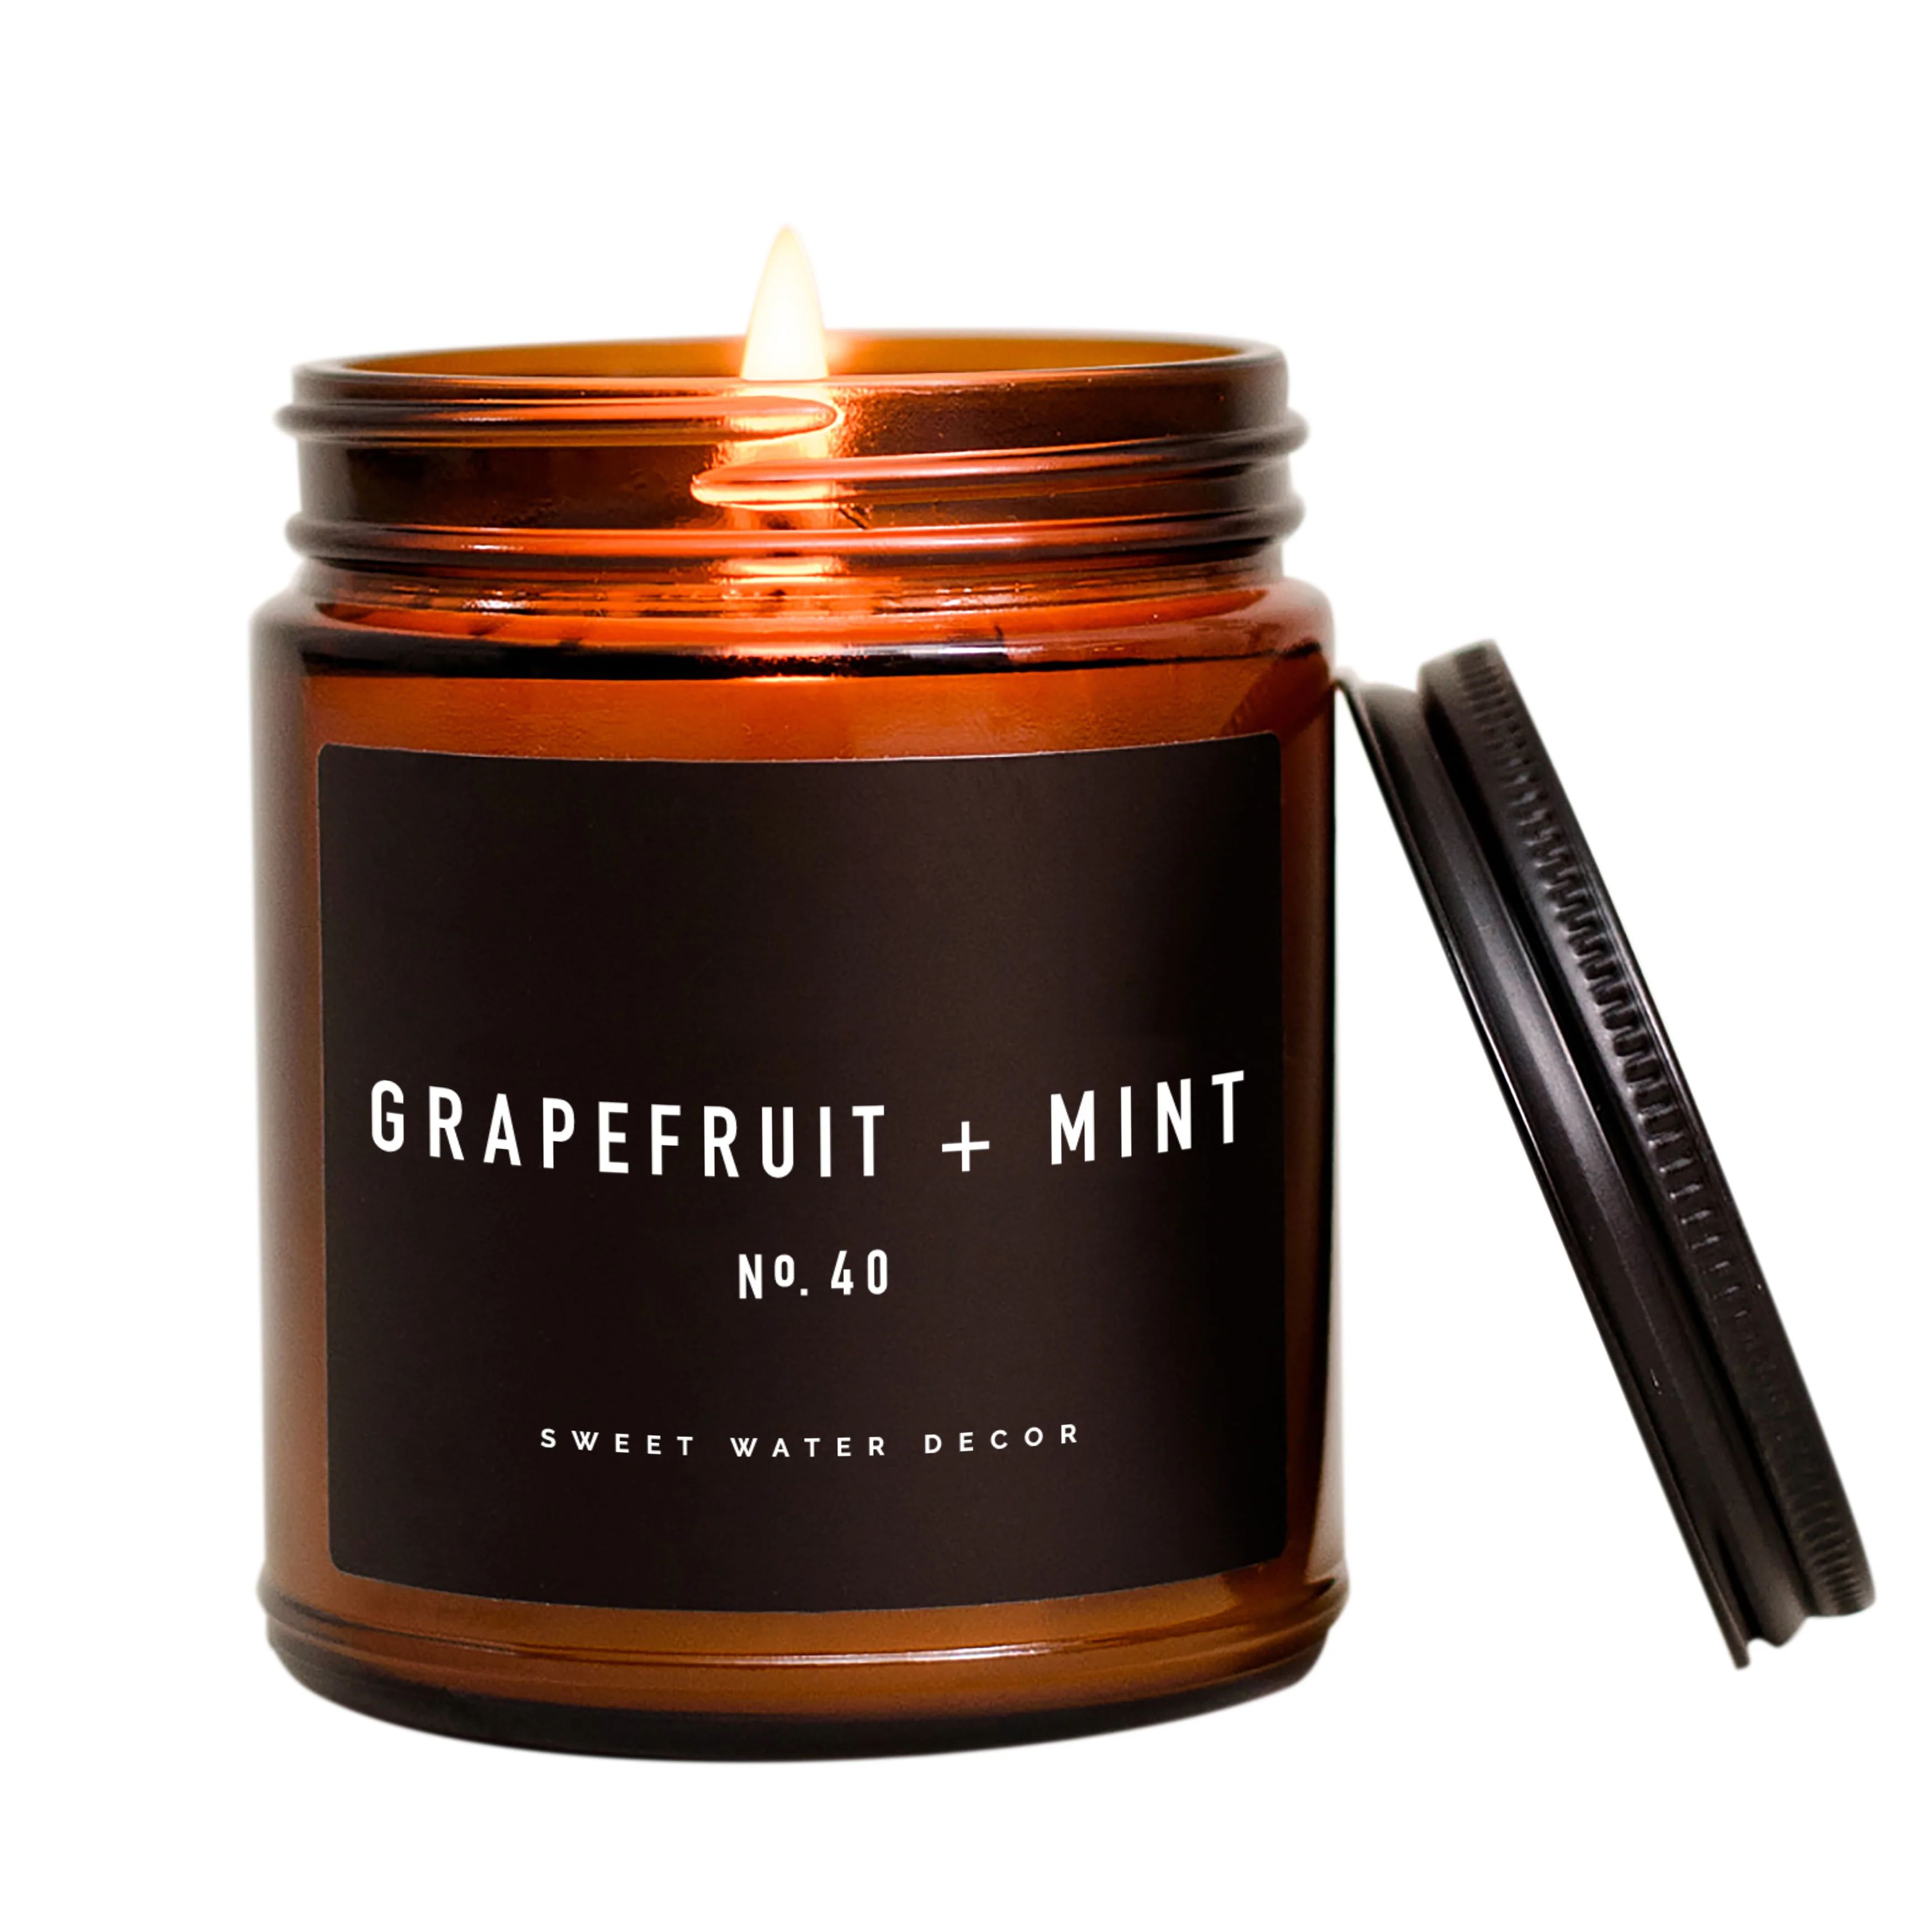 Grapefruit + Mint Soy Candle | Amber Jar Candle | Sweet Water Decor, LLC